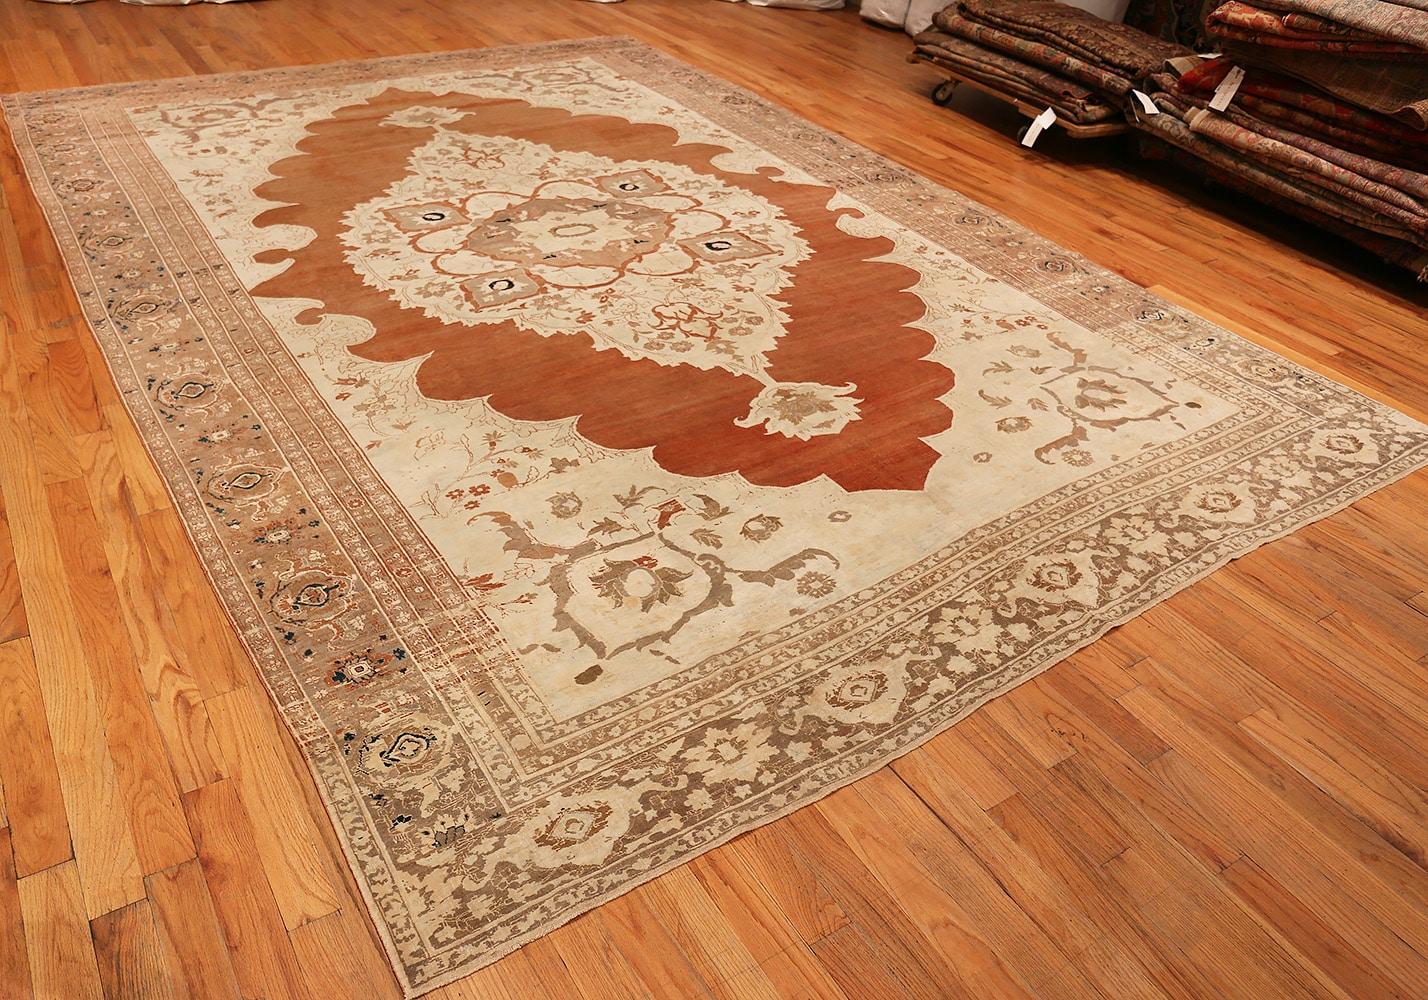 Rare Cotton and Wool Antique Persian Tabriz Rug. Size: 10 ft 3 in x 14 ft 10 in 1